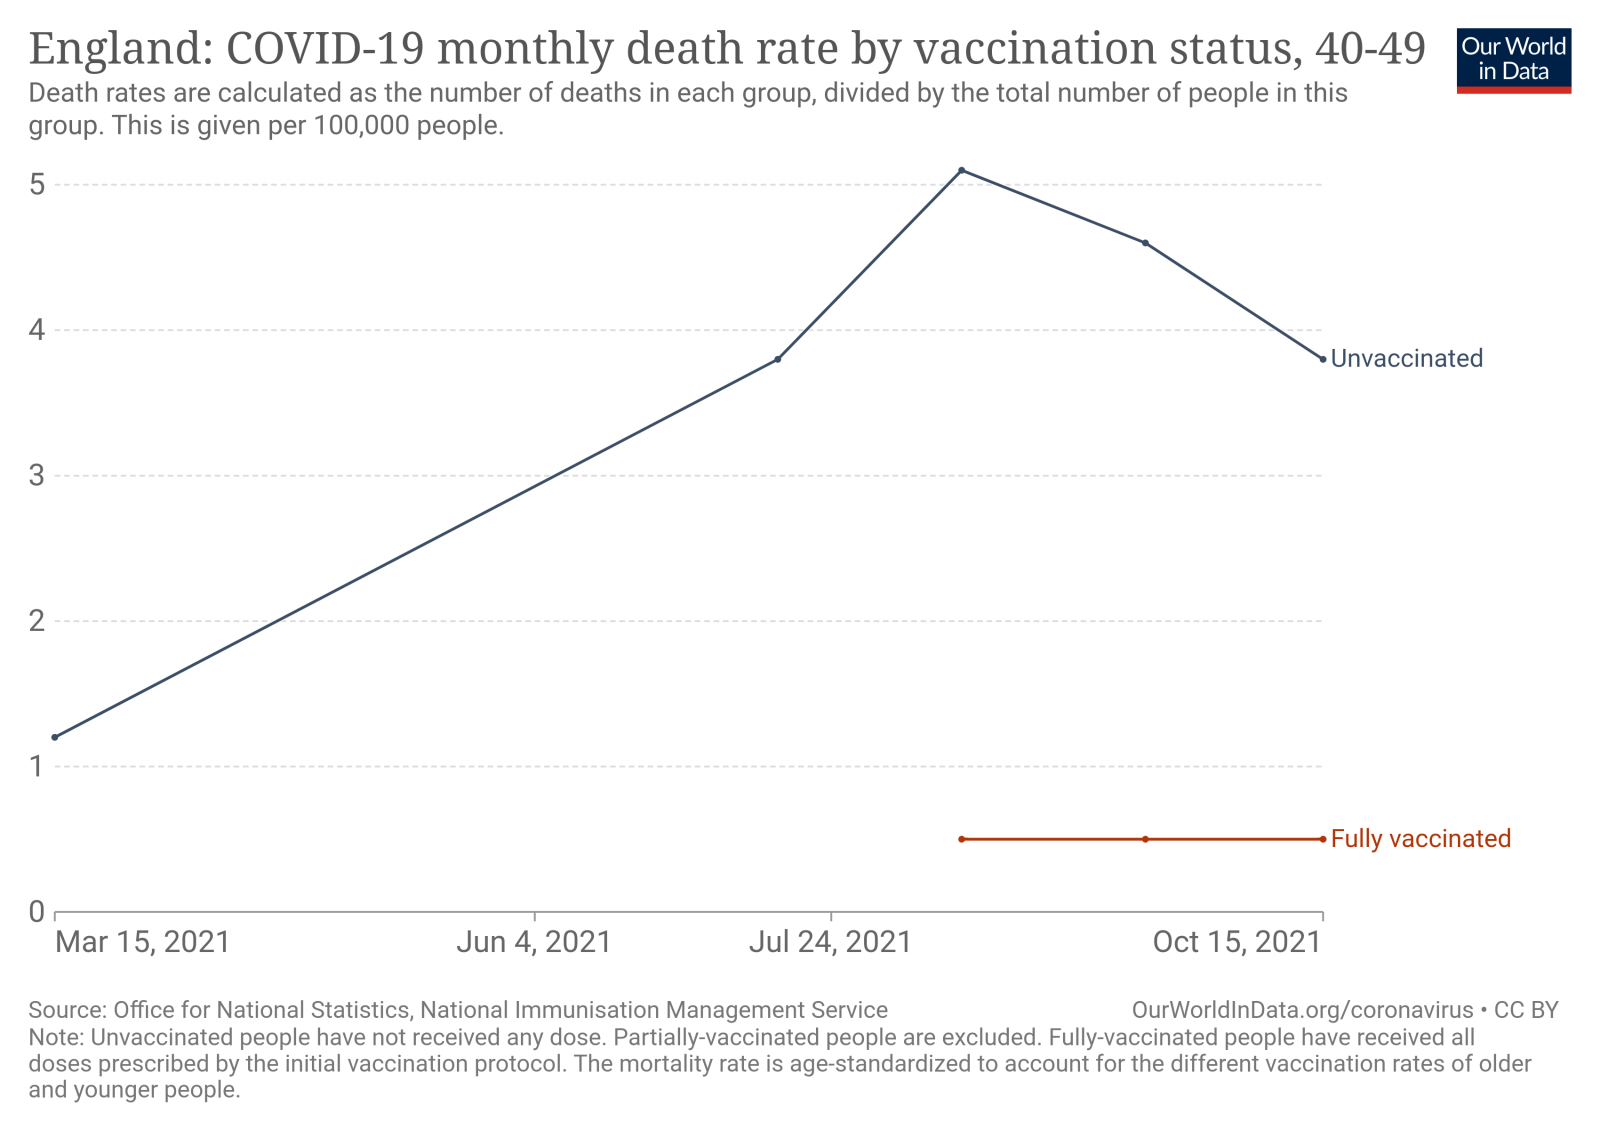 england-covid-19-mortality-rate-by-vaccination-status-1.png